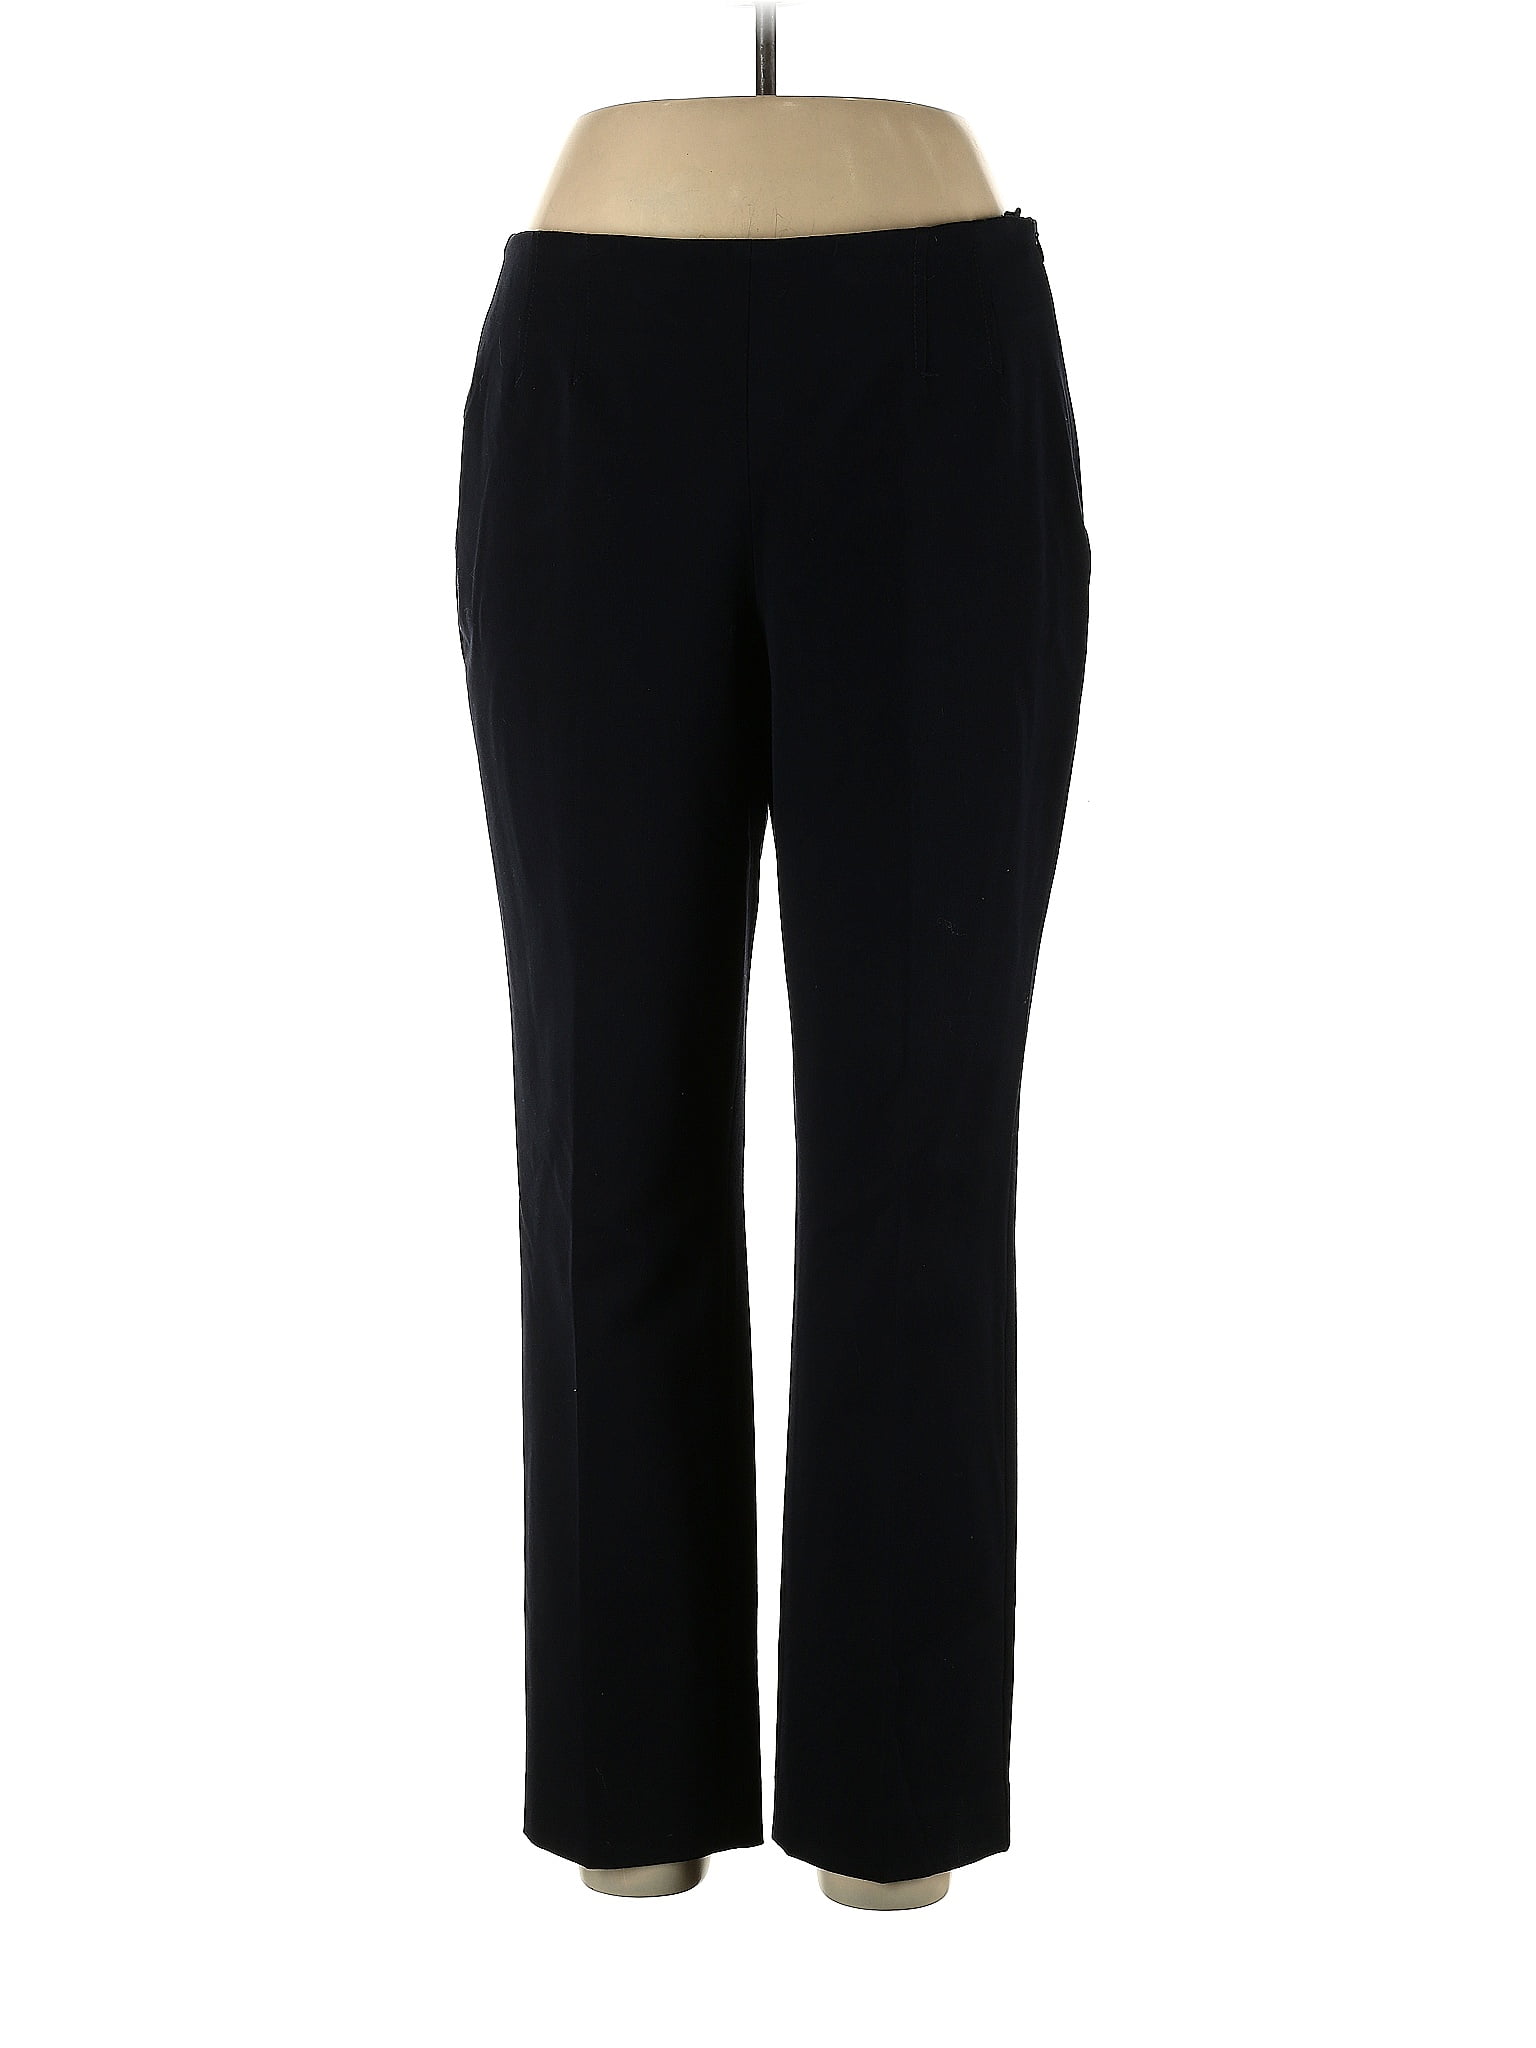 Peter Nygard Spandex Casual Pants for Women